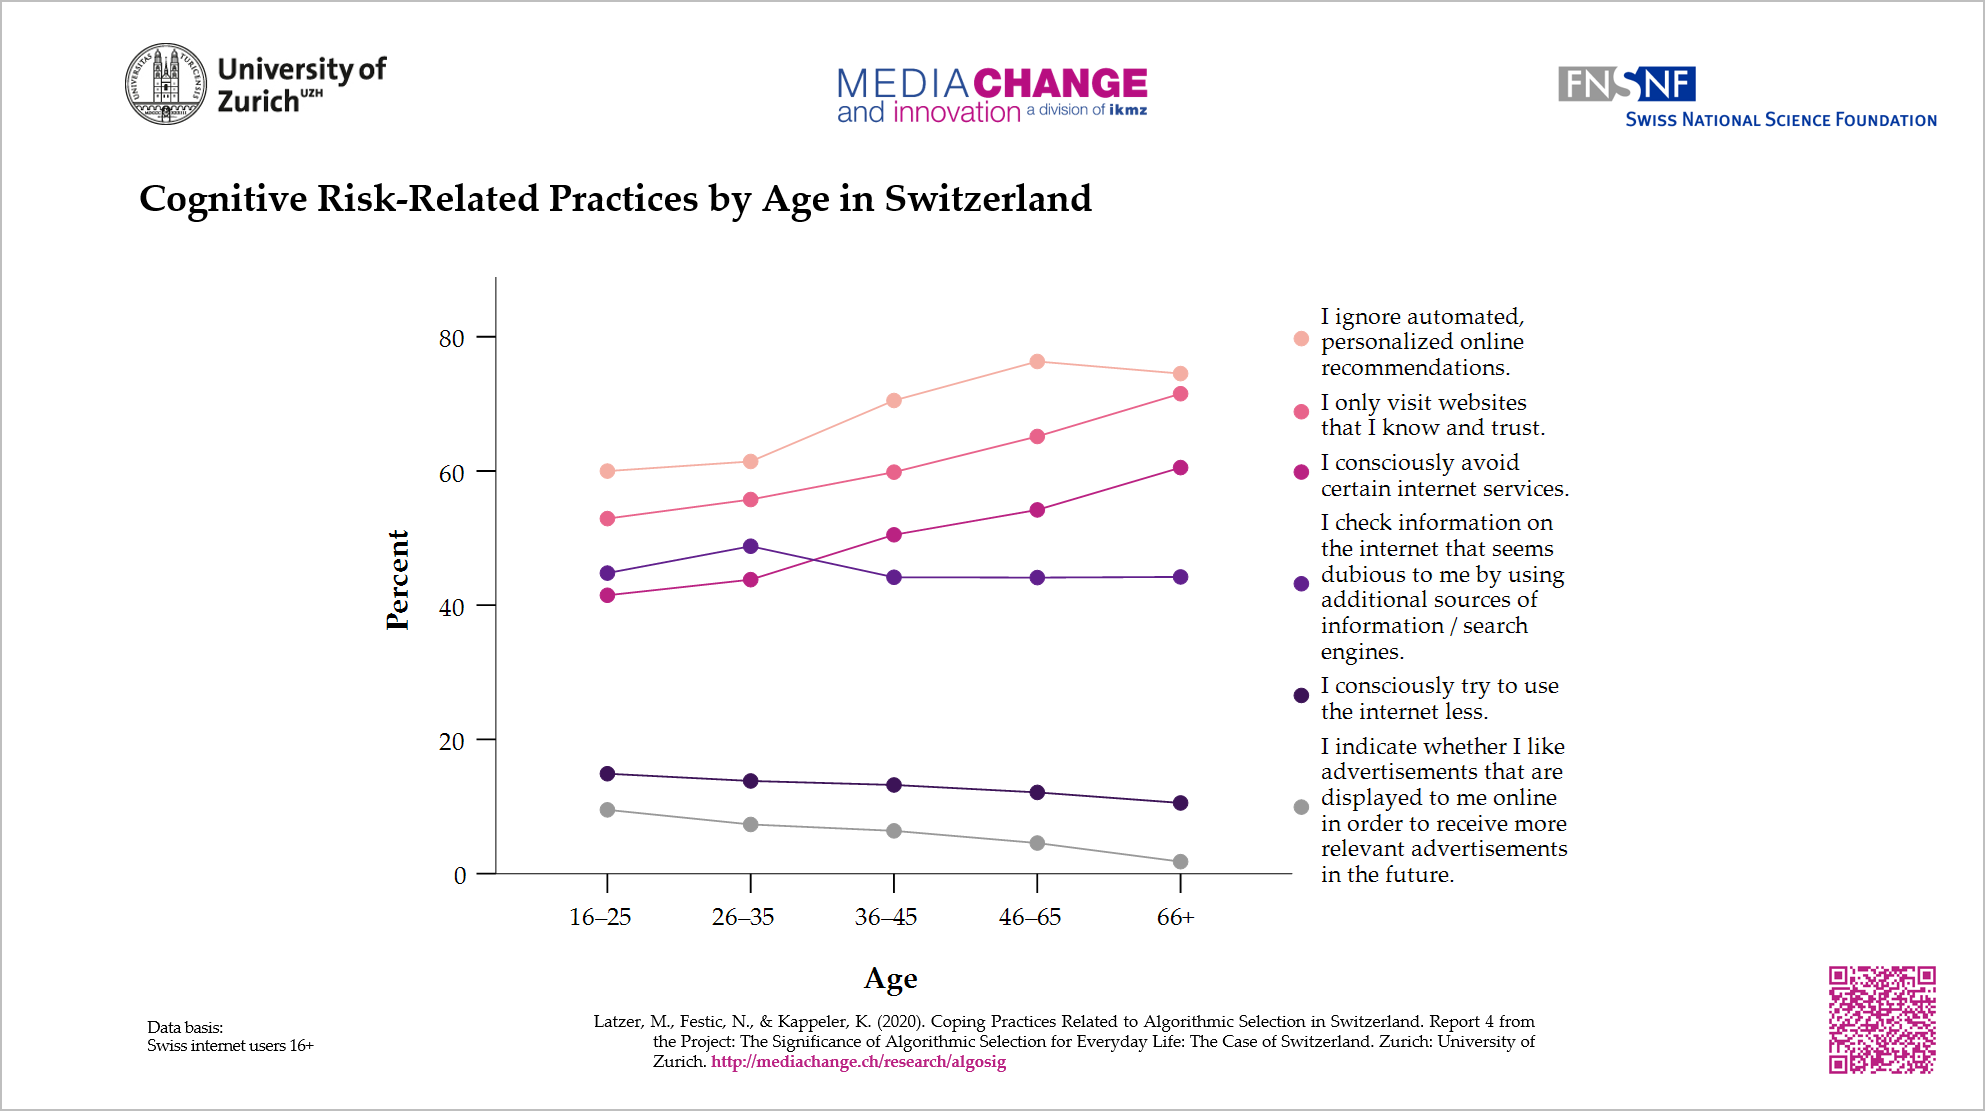 Cognitive practices by age